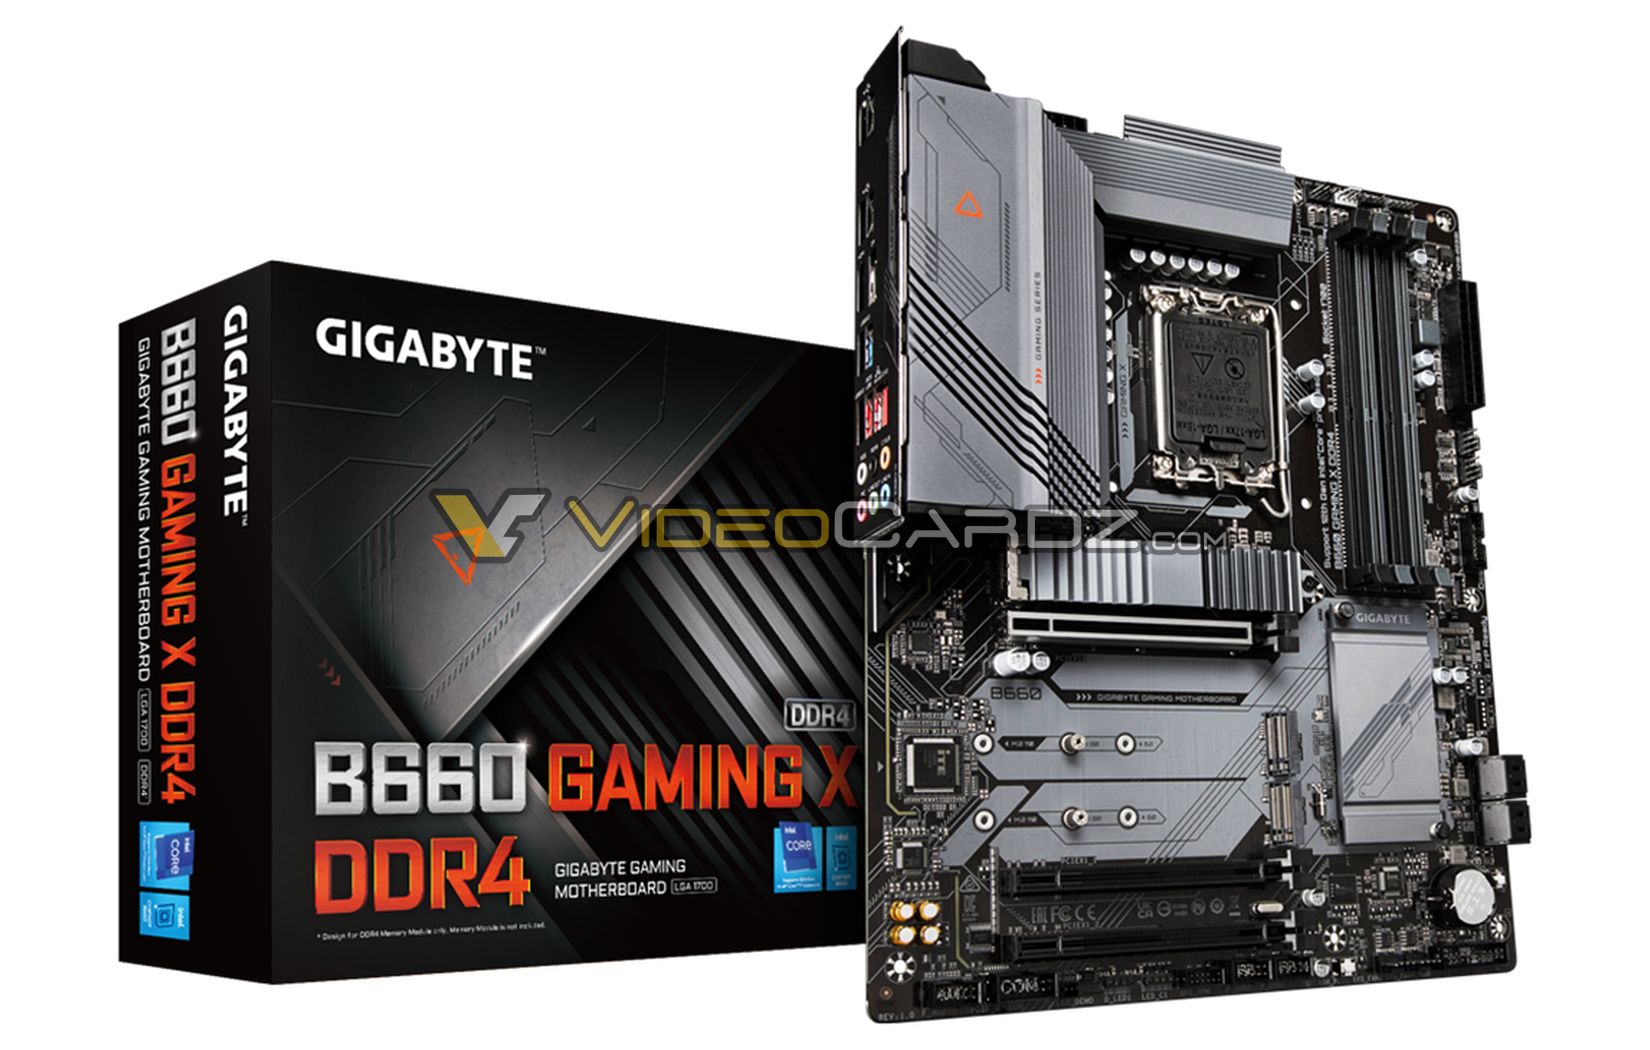 The first Gigabyte B660 Gaming X board appears